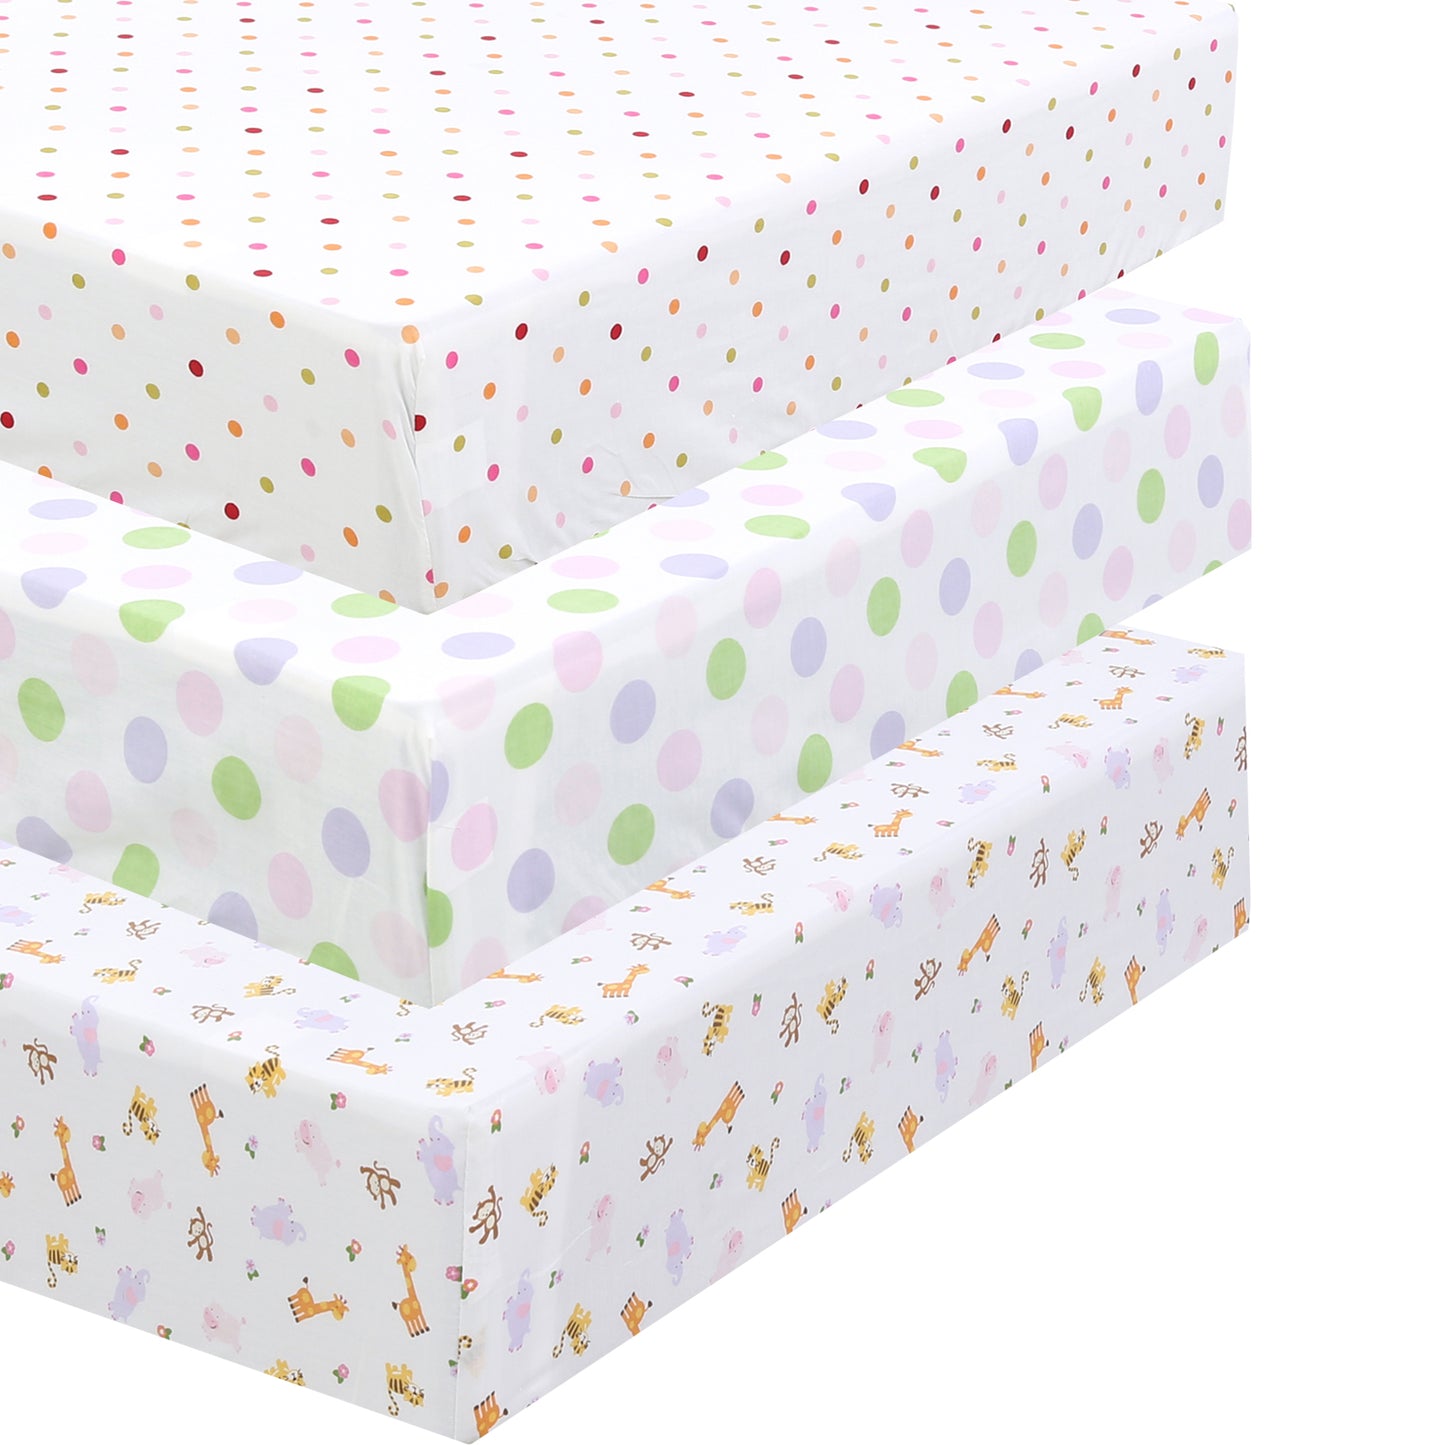 3 Piece Crib/Toddler Cotton Fitted Sheets Colorful Polka Dot Zoo Animal Friends